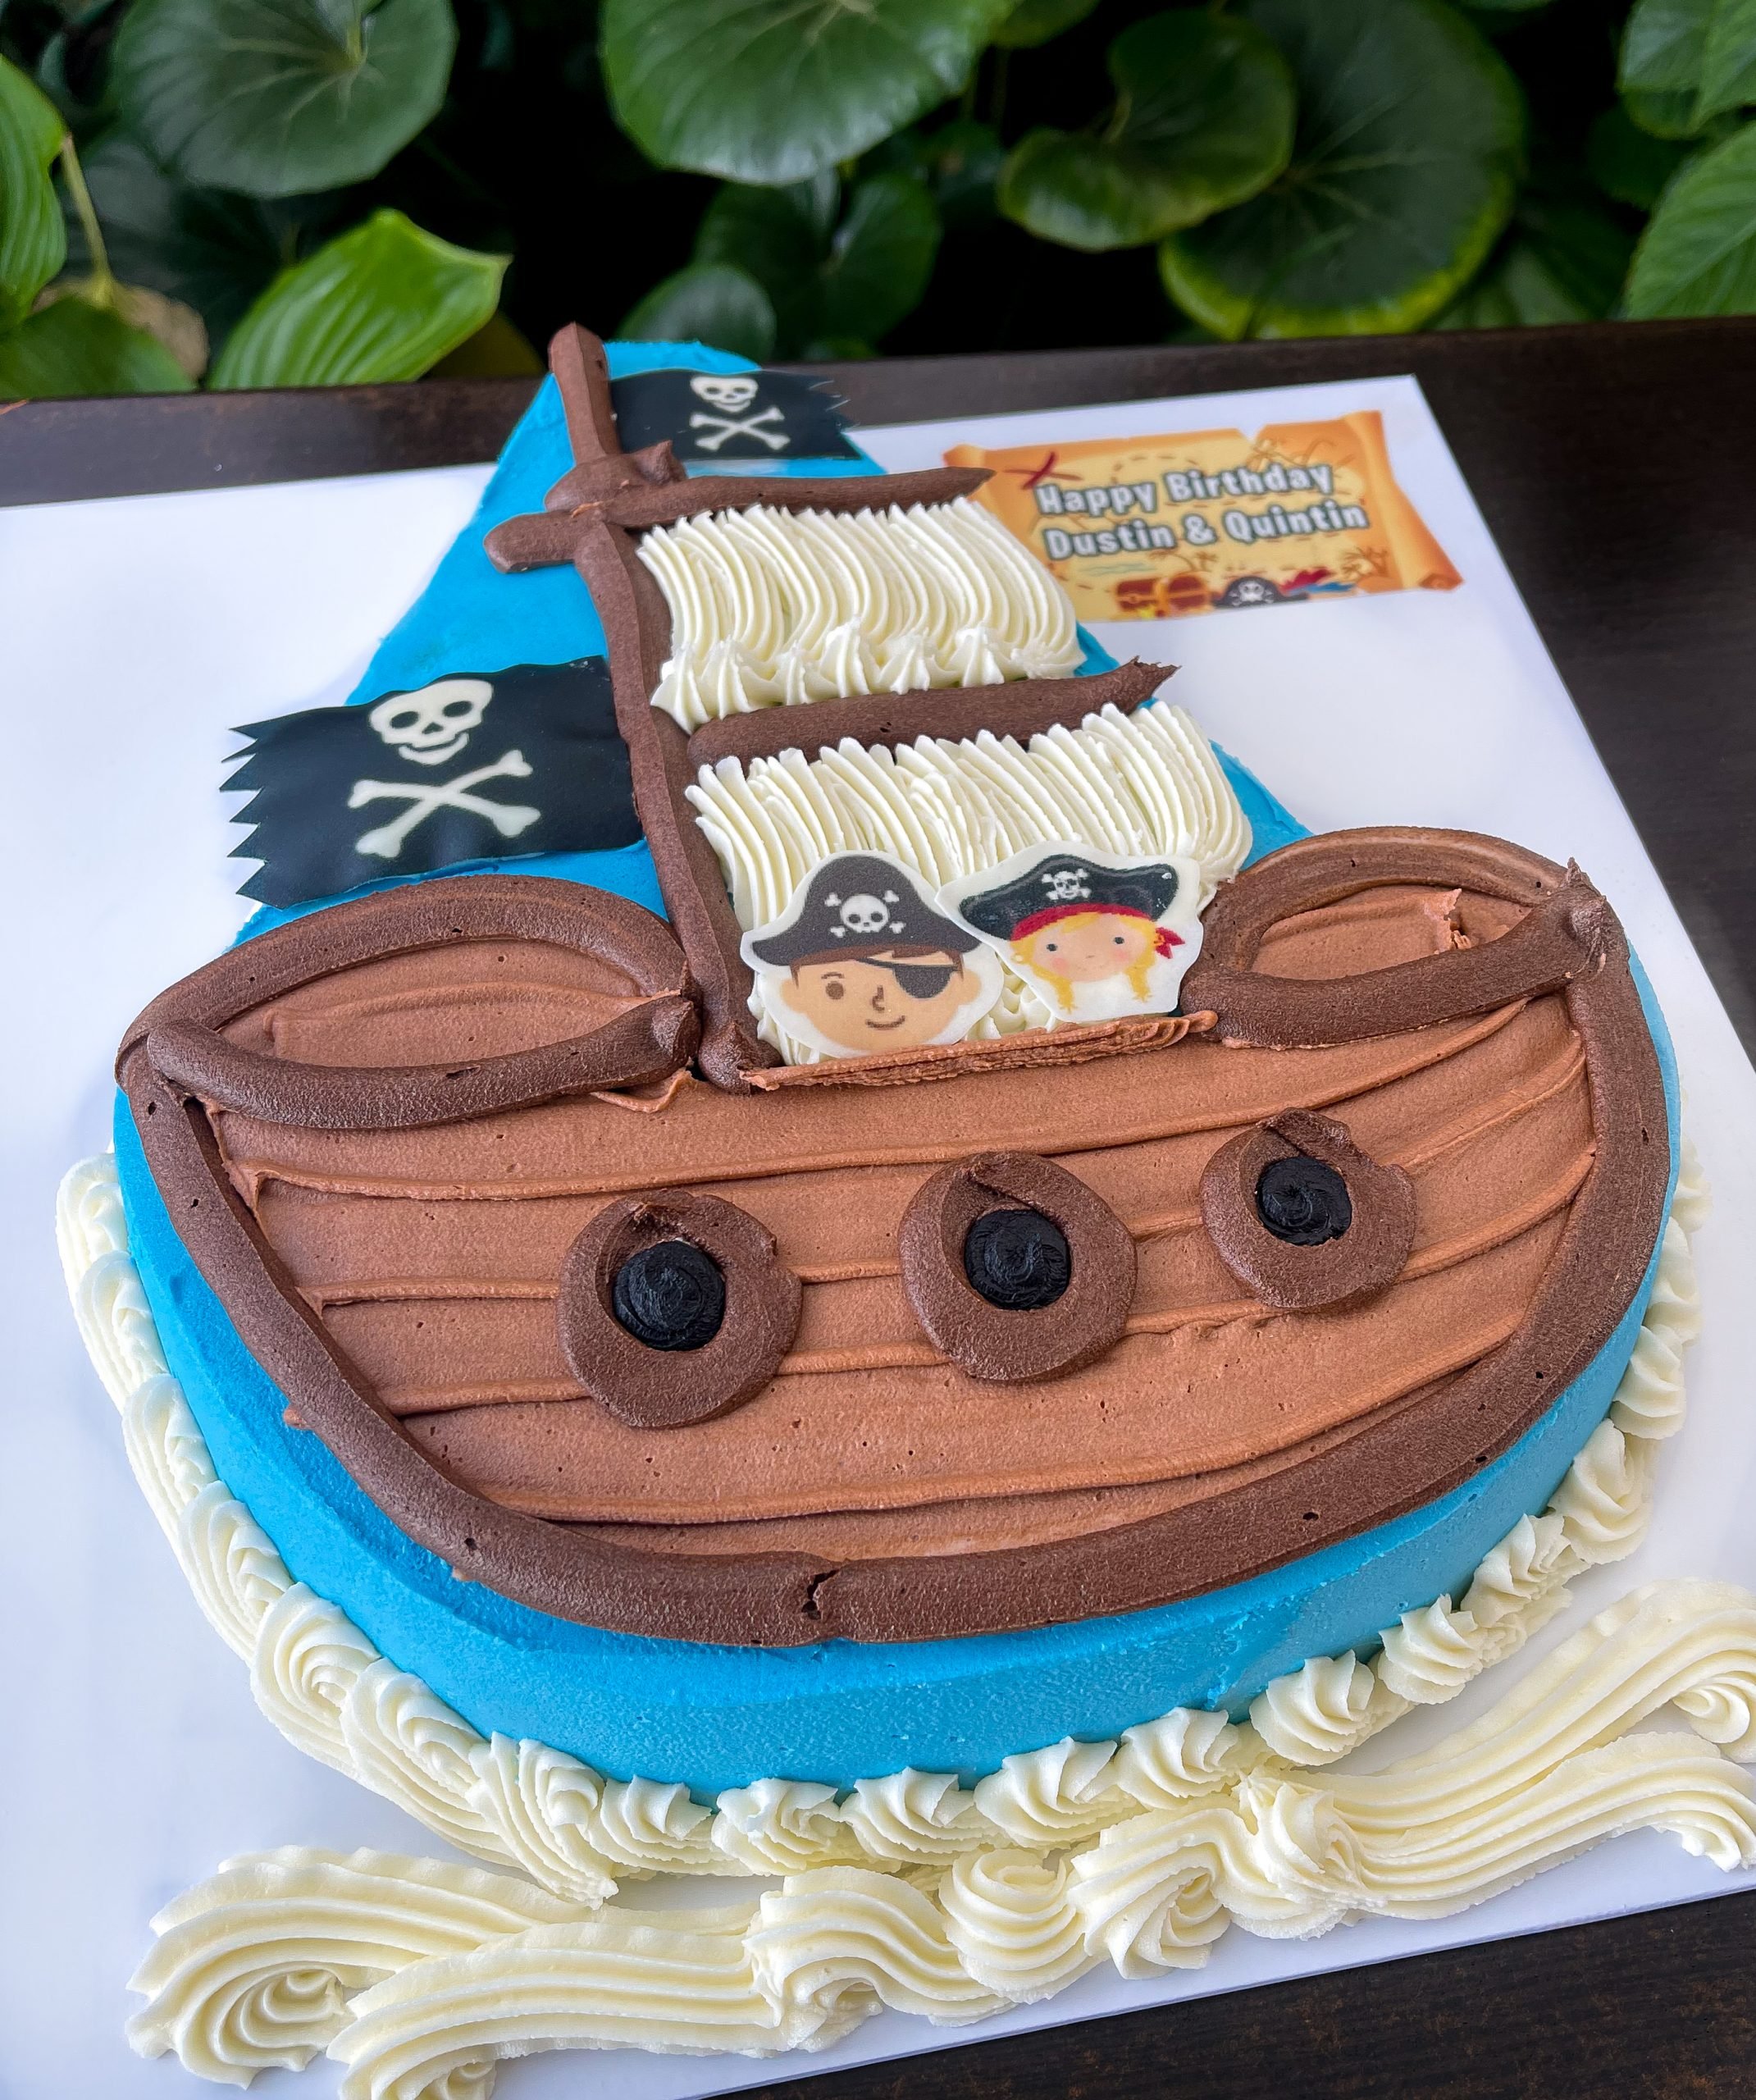 Discover more than 79 pirate ship cake topper latest - awesomeenglish.edu.vn